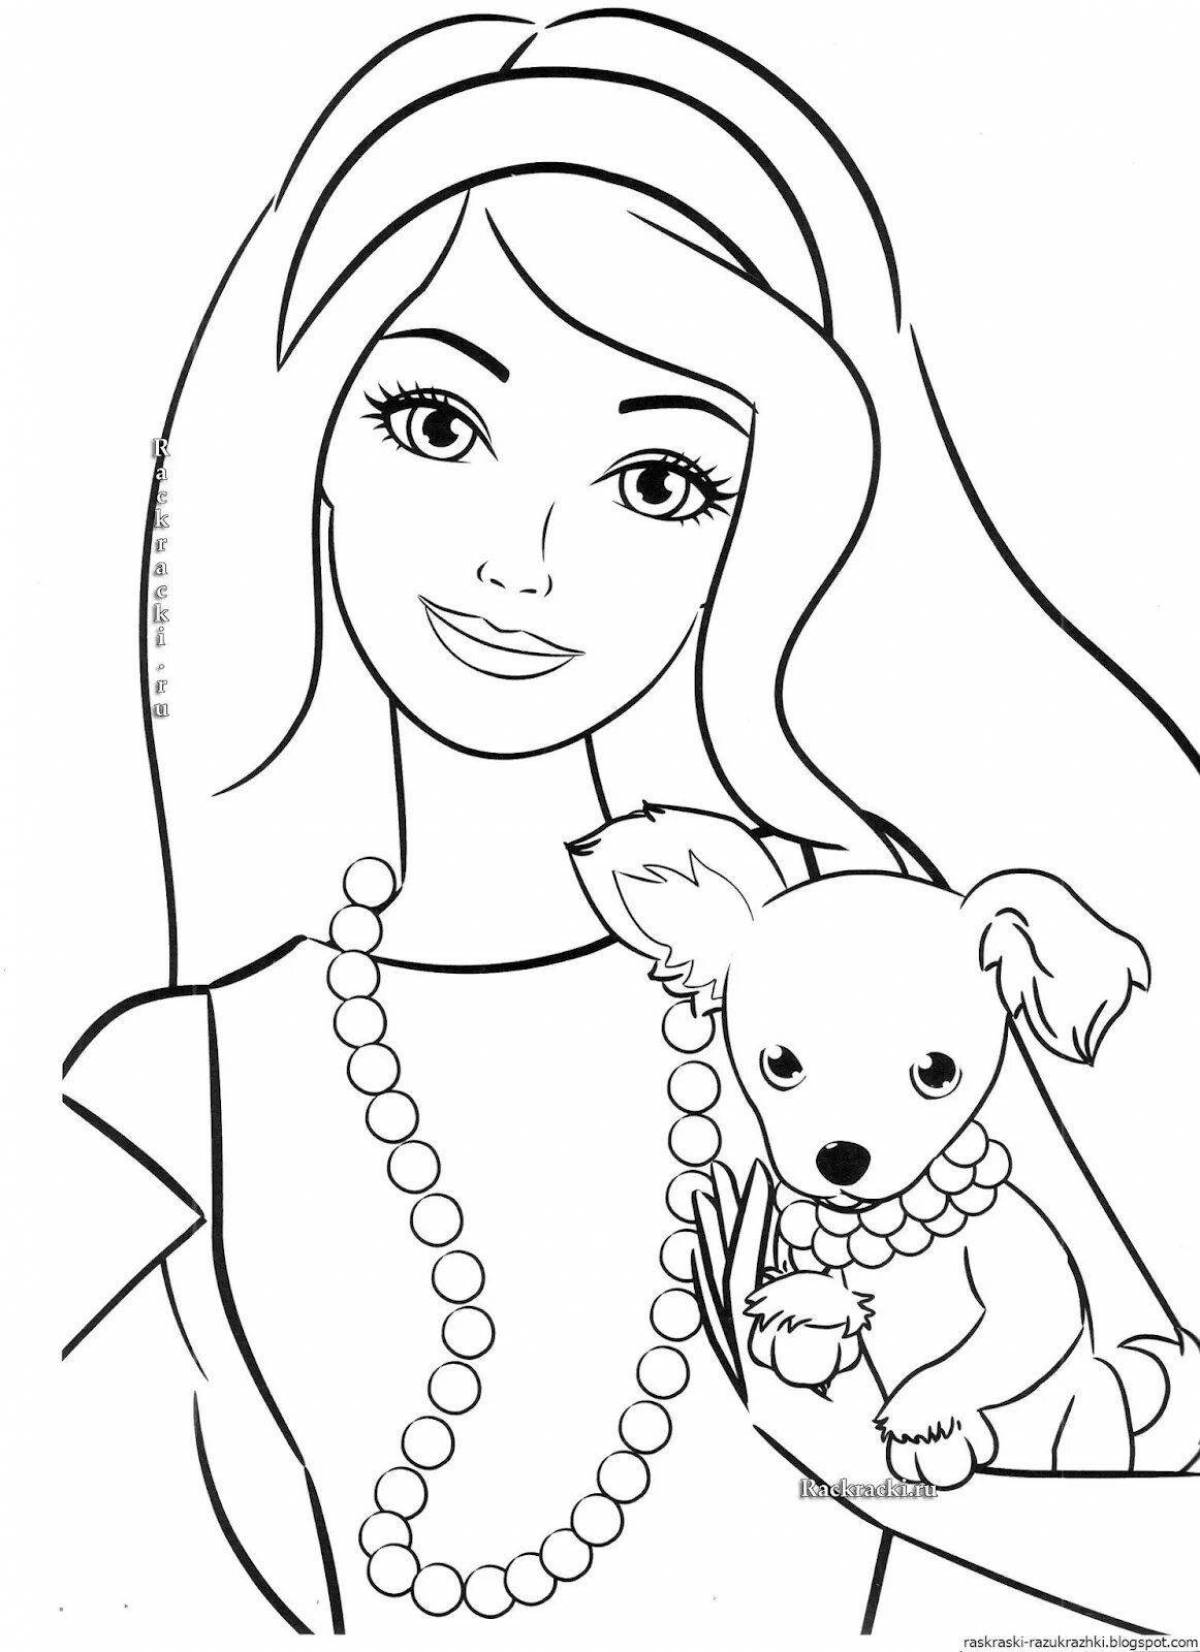 Inspirational coloring book for 15 year old girls